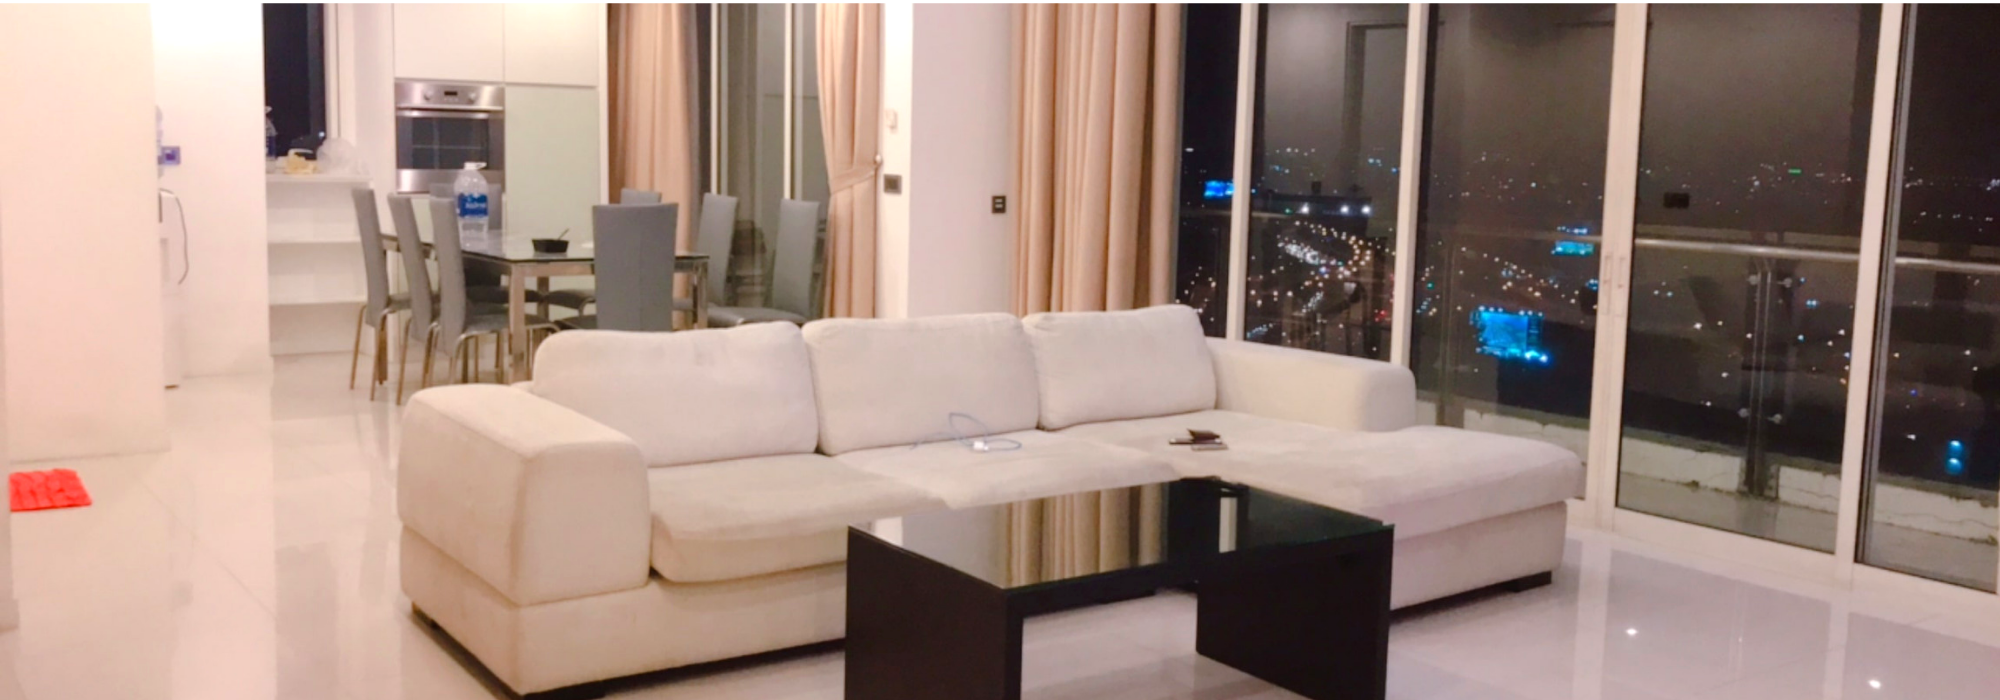 Penthouse Duplex The Estella – 3 nice bedrooms and large living room